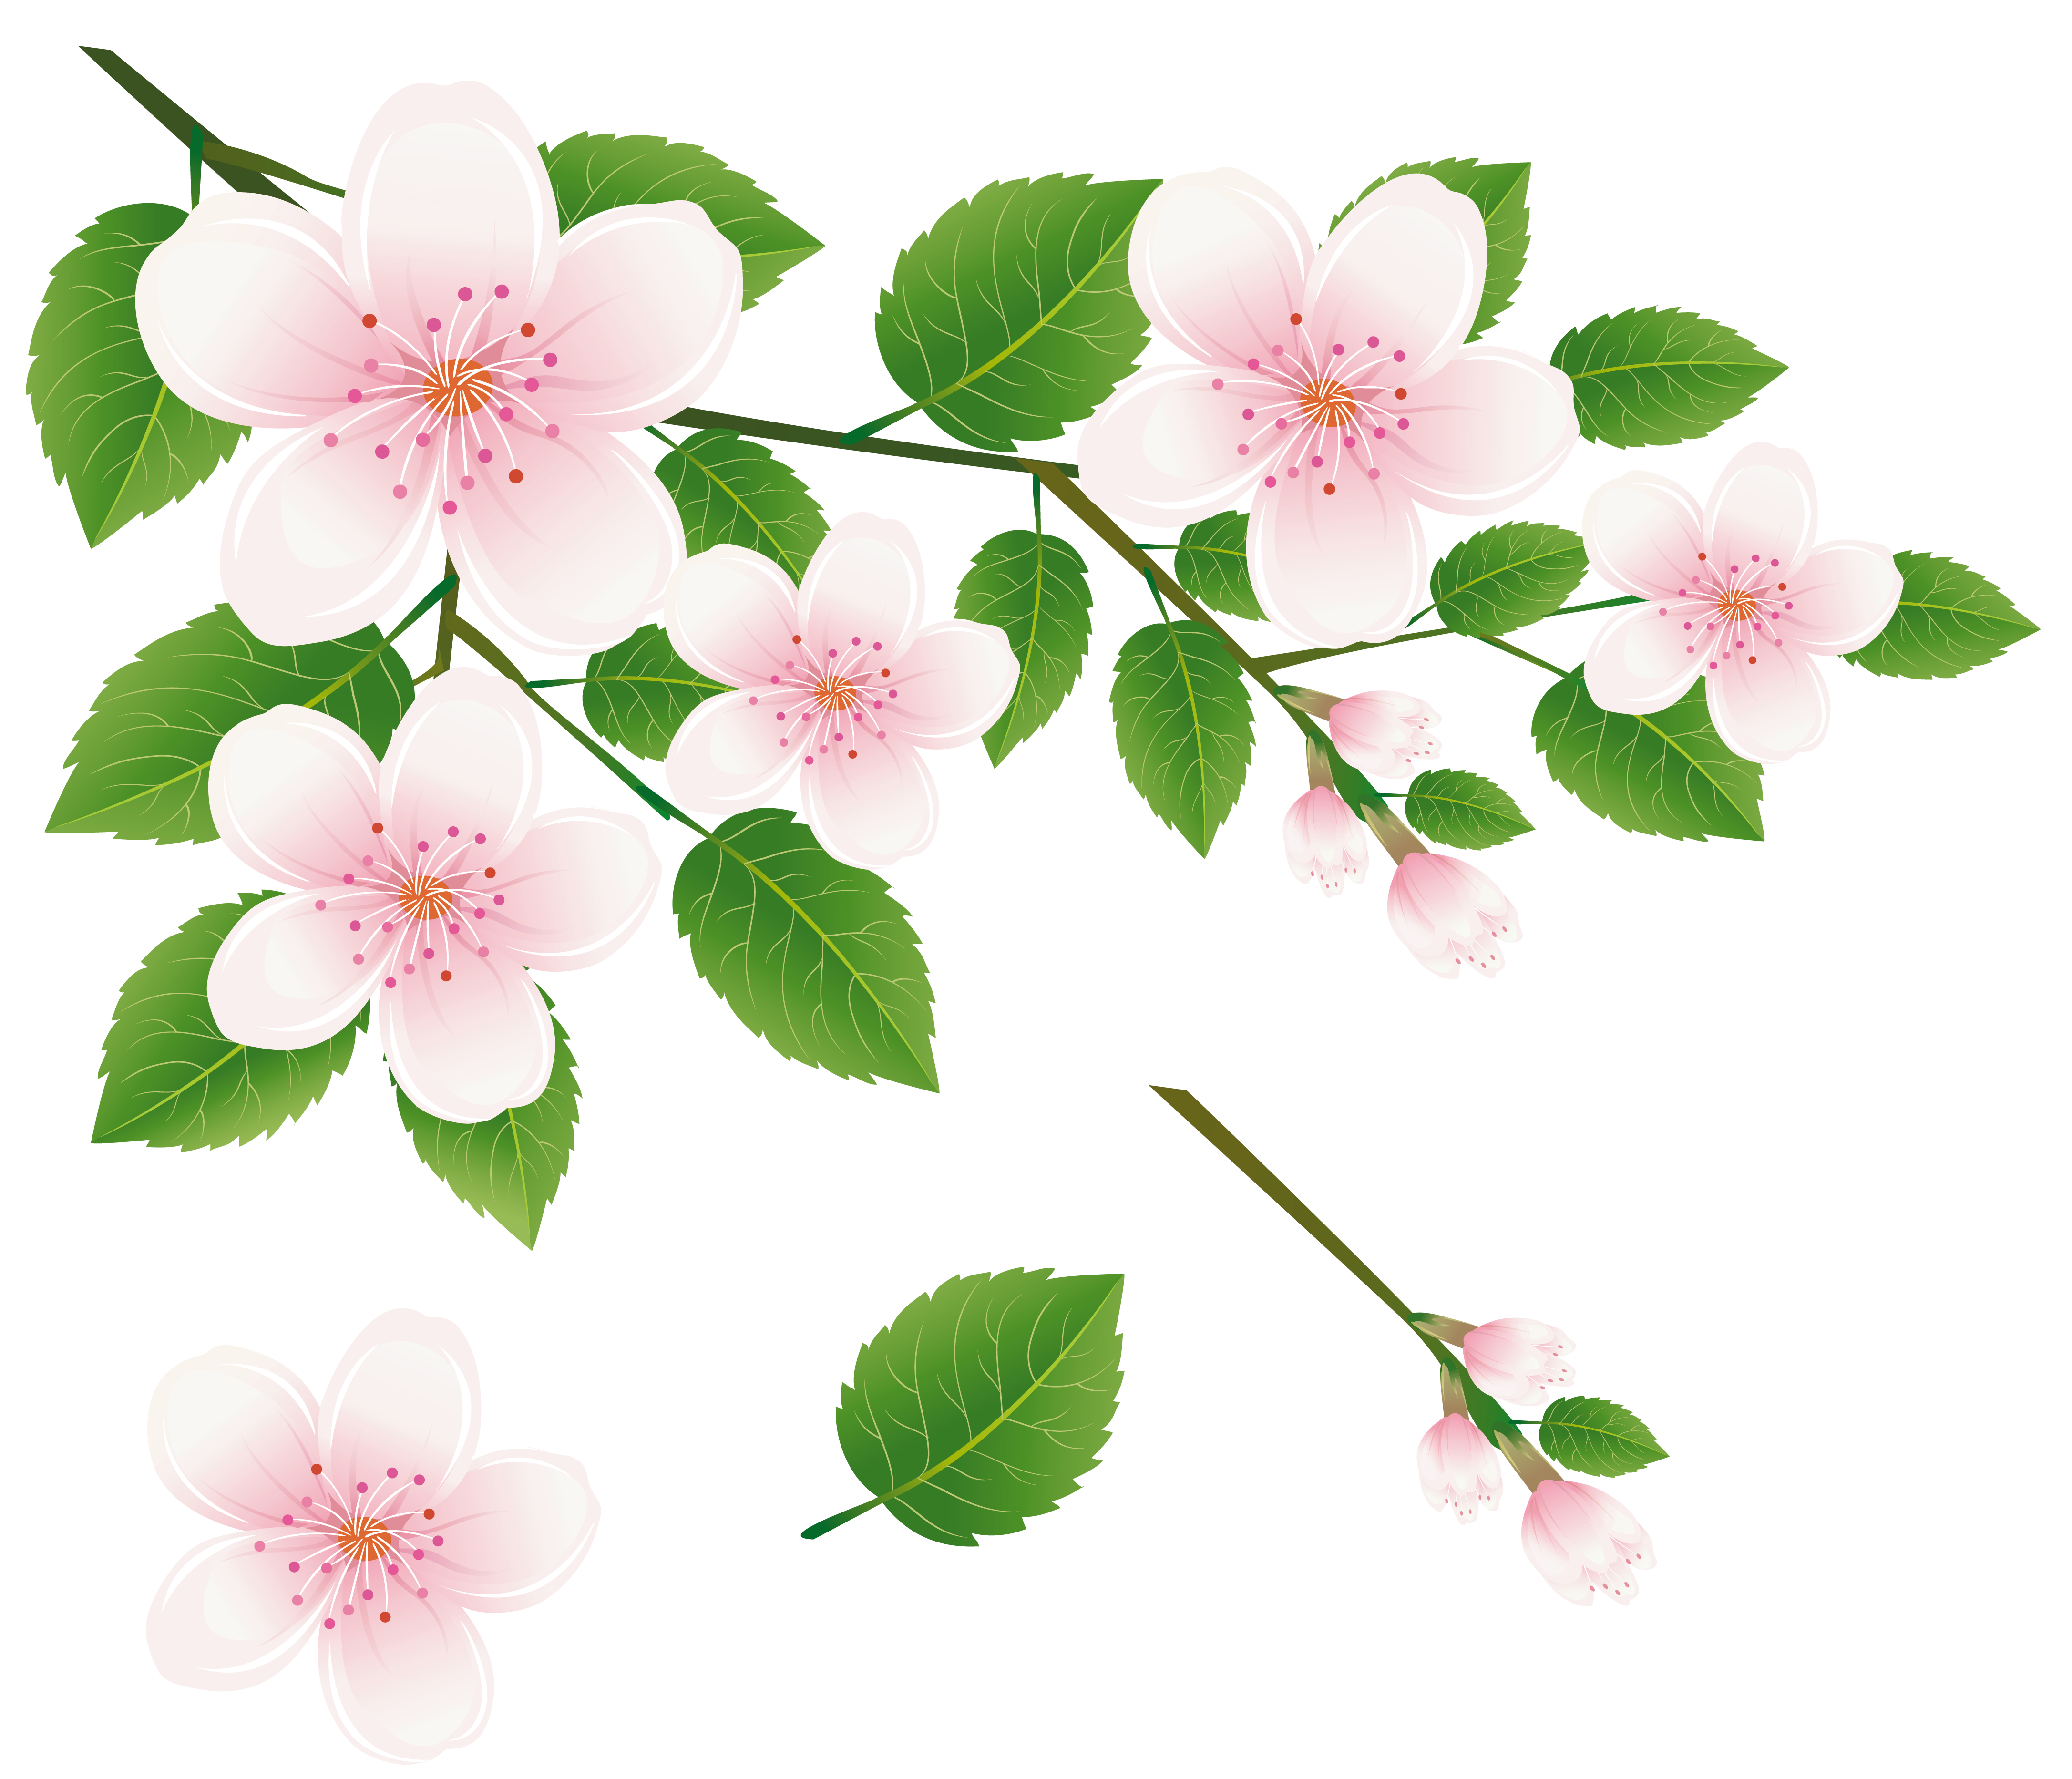 Spring Tree Branch with Flowers PNG Clipart Picture.